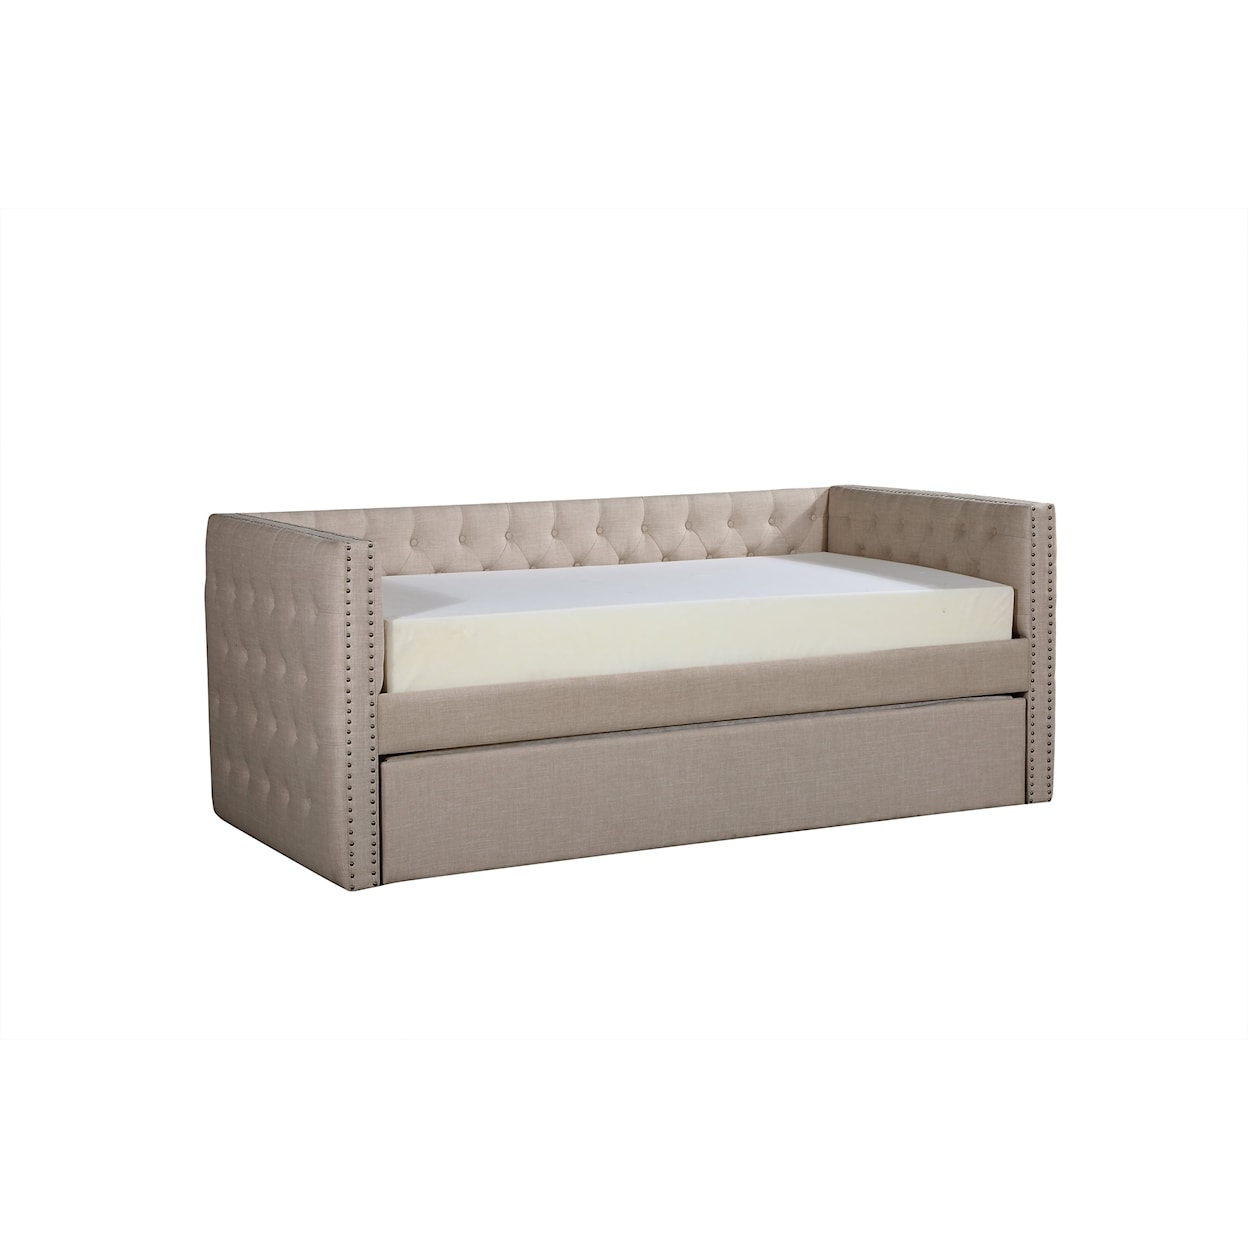 CM Trina Daybed